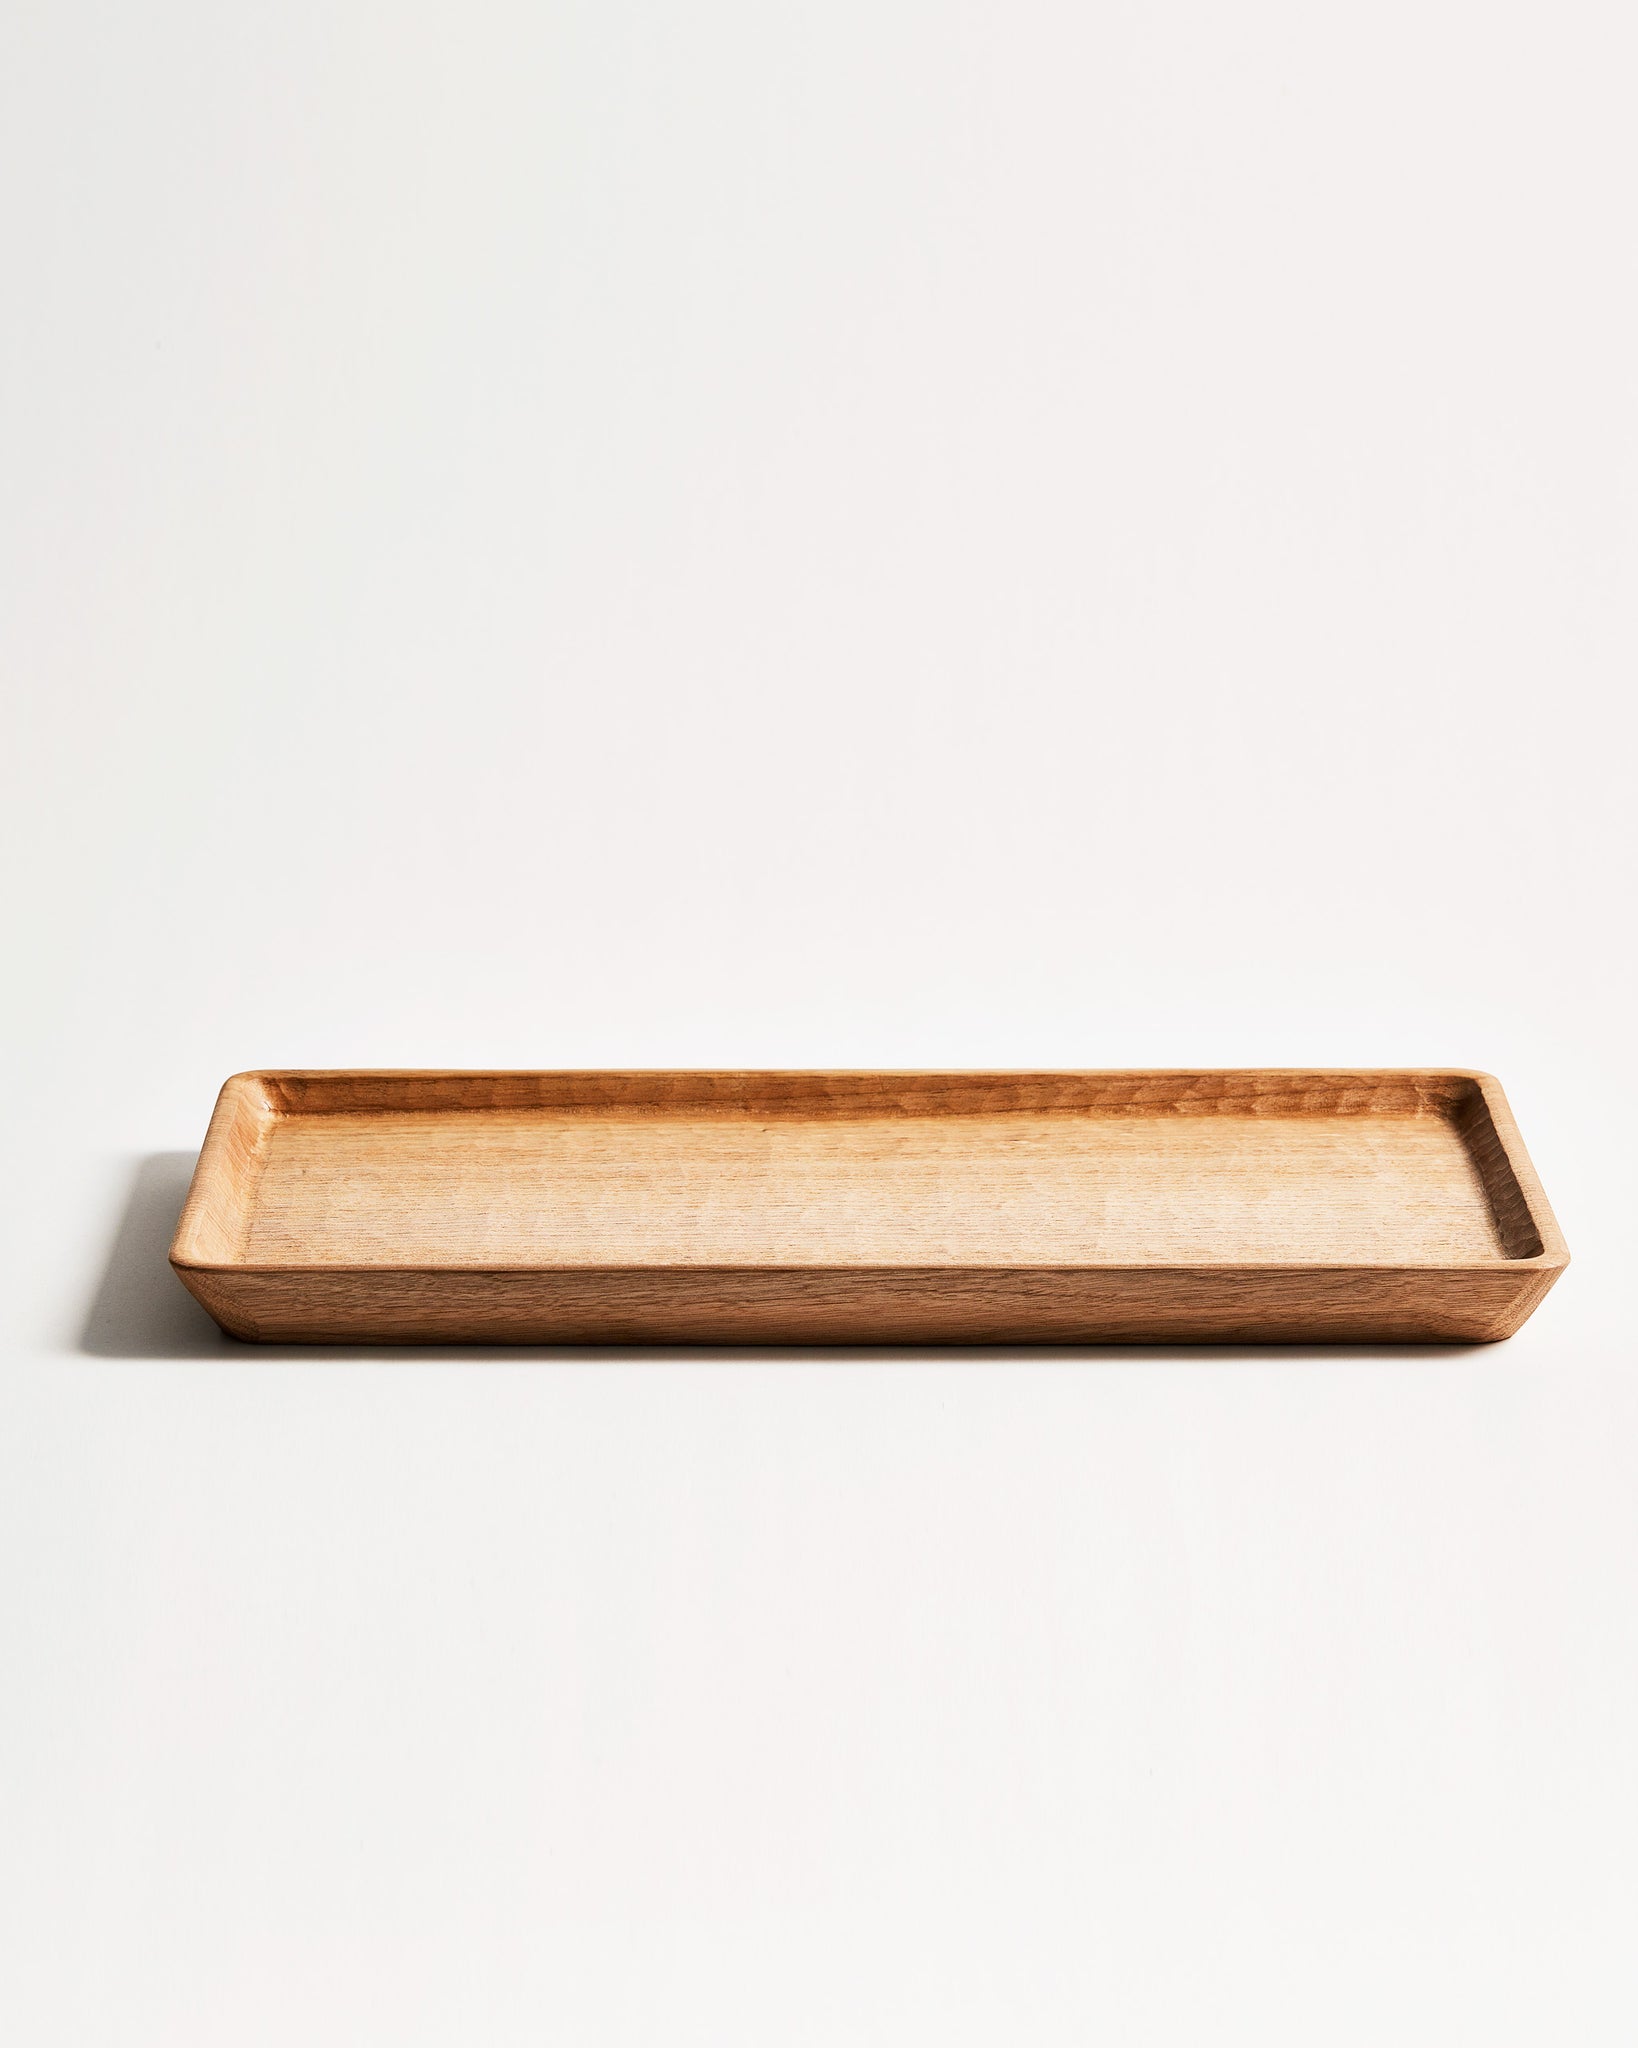 Side view of Japanese Walnut Long Tray with Nano Glass Finish by Ryuji Mitani against white-gray background.